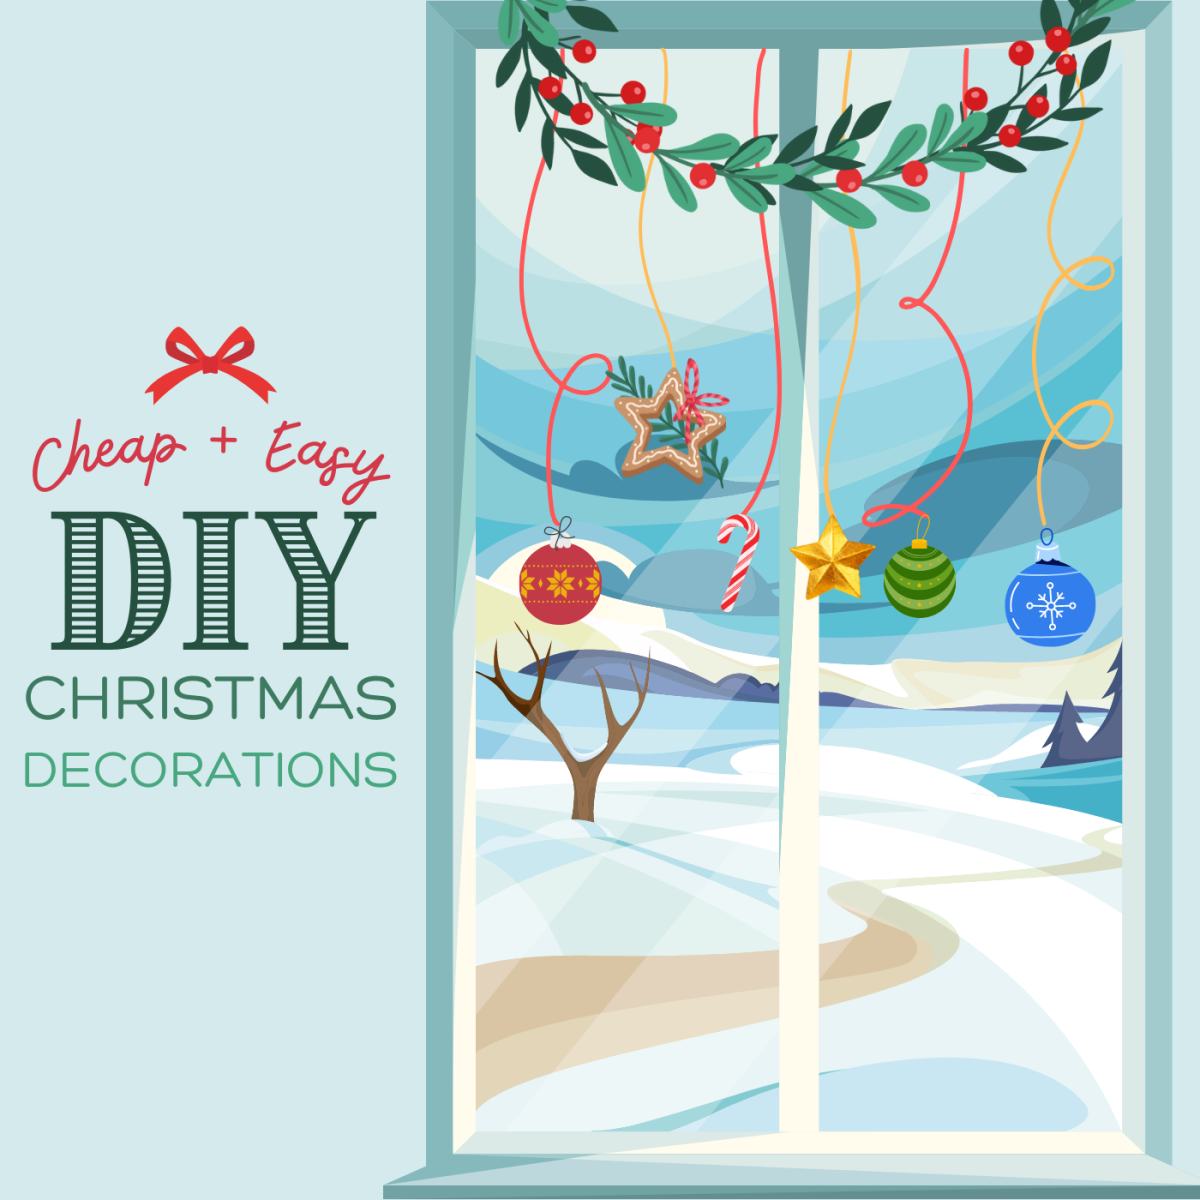 Get loads of ideas for decorating your home this Christmas while saving time and money!